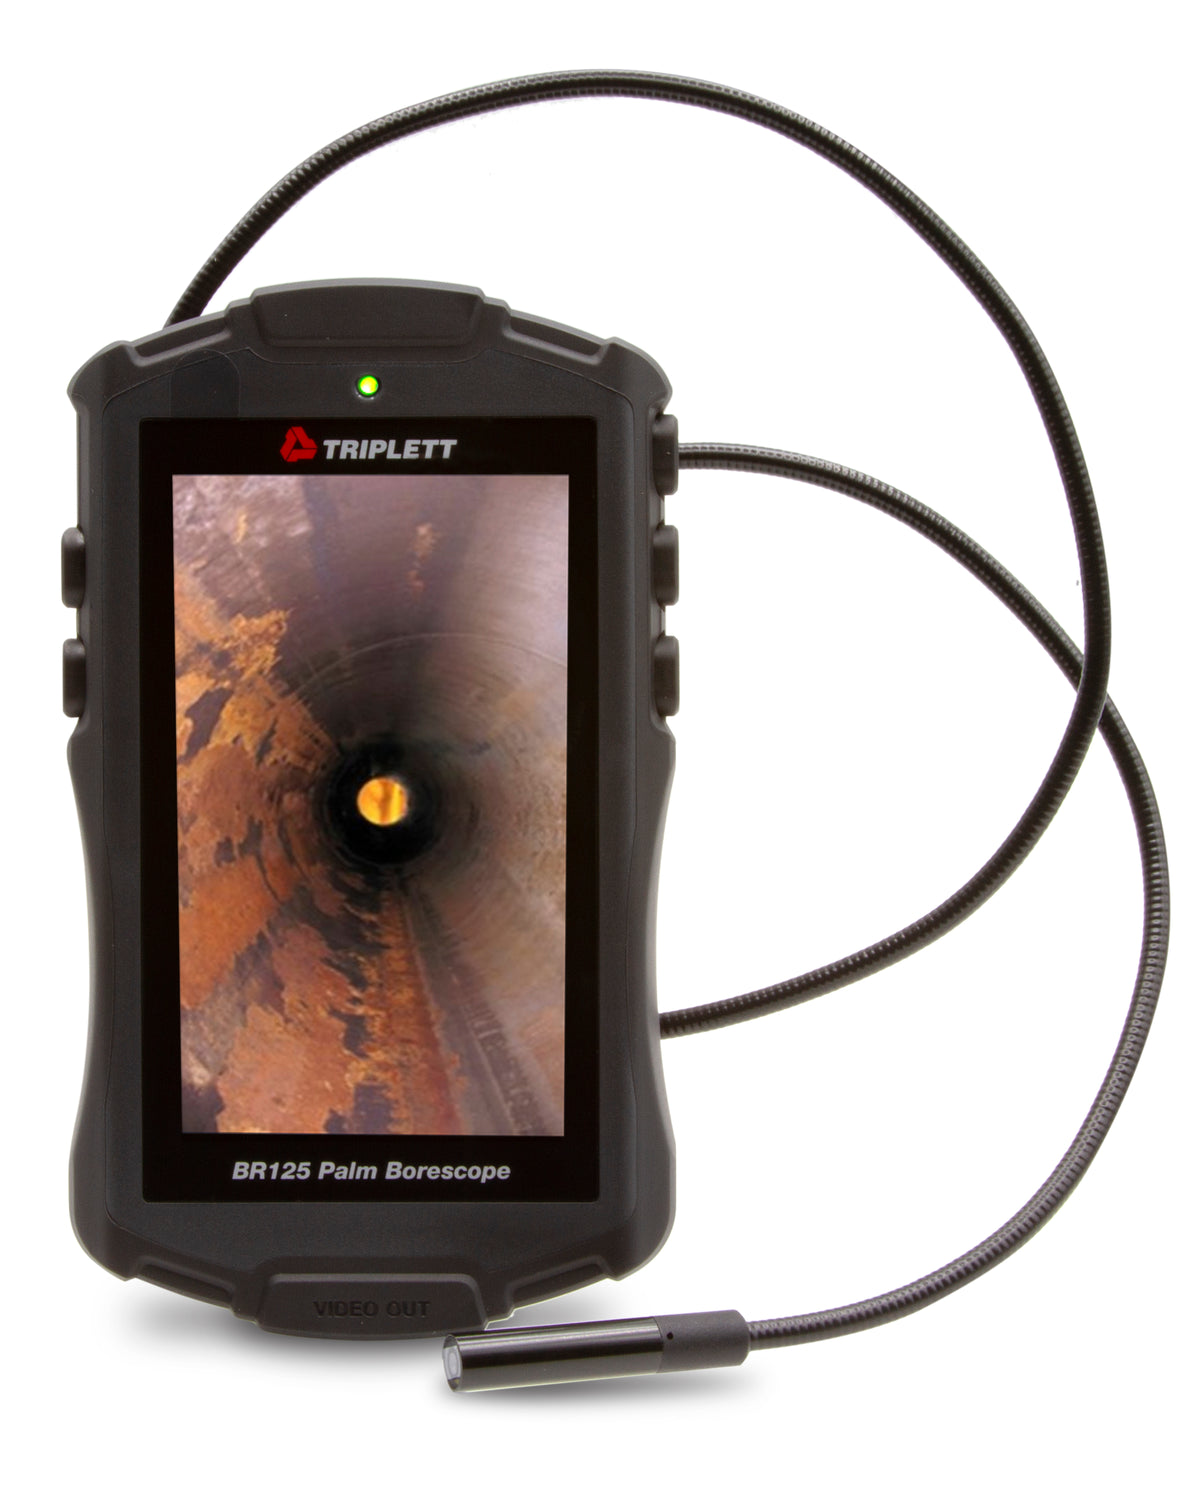 Borescope Inspection Camera 5.5mm, 2M Cable - (BR260)